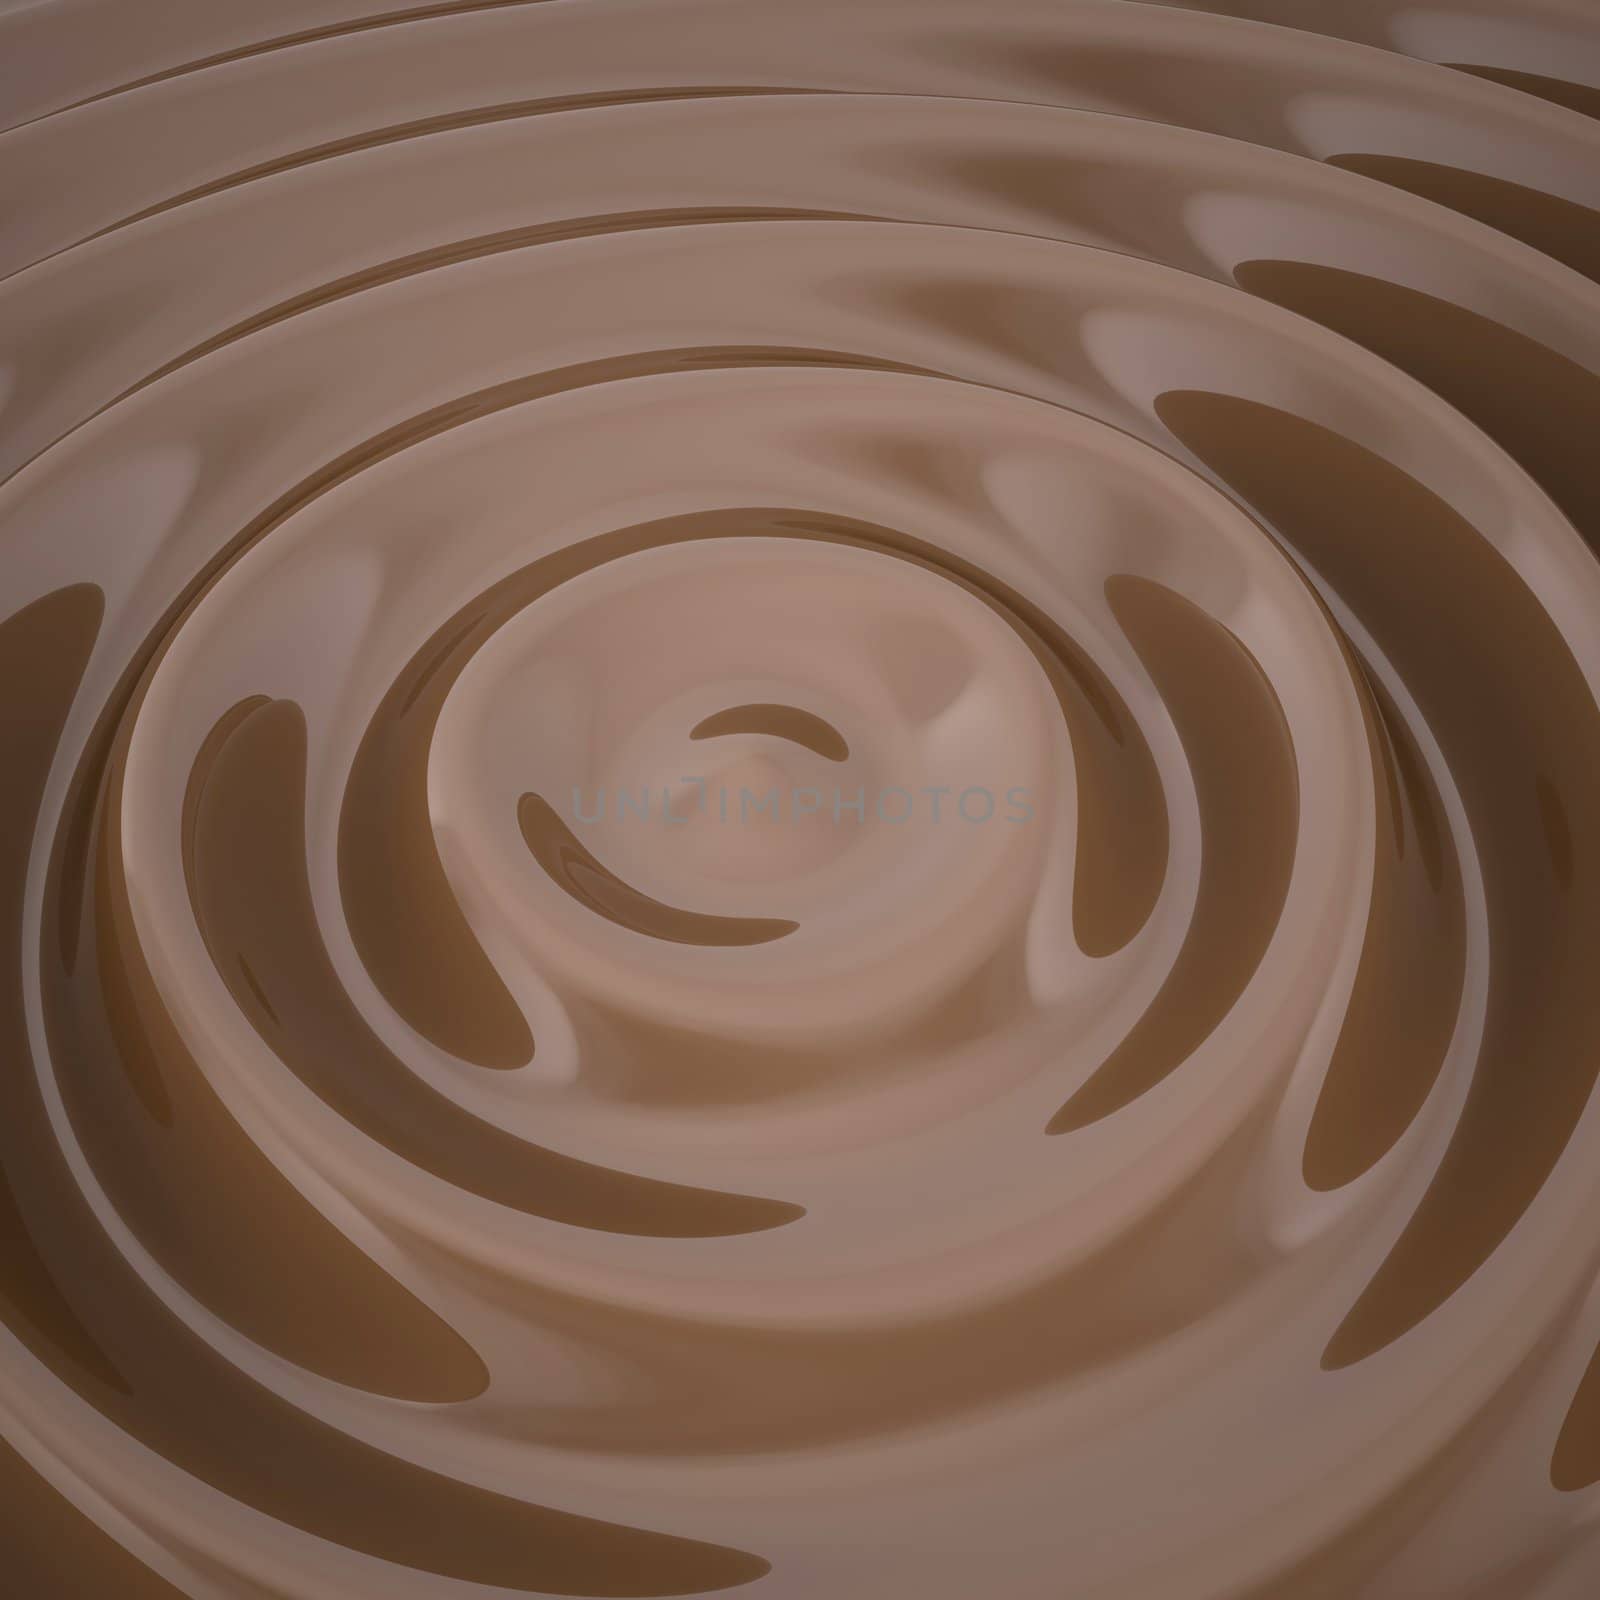 Waves on the surface of the chocolate by cherezoff